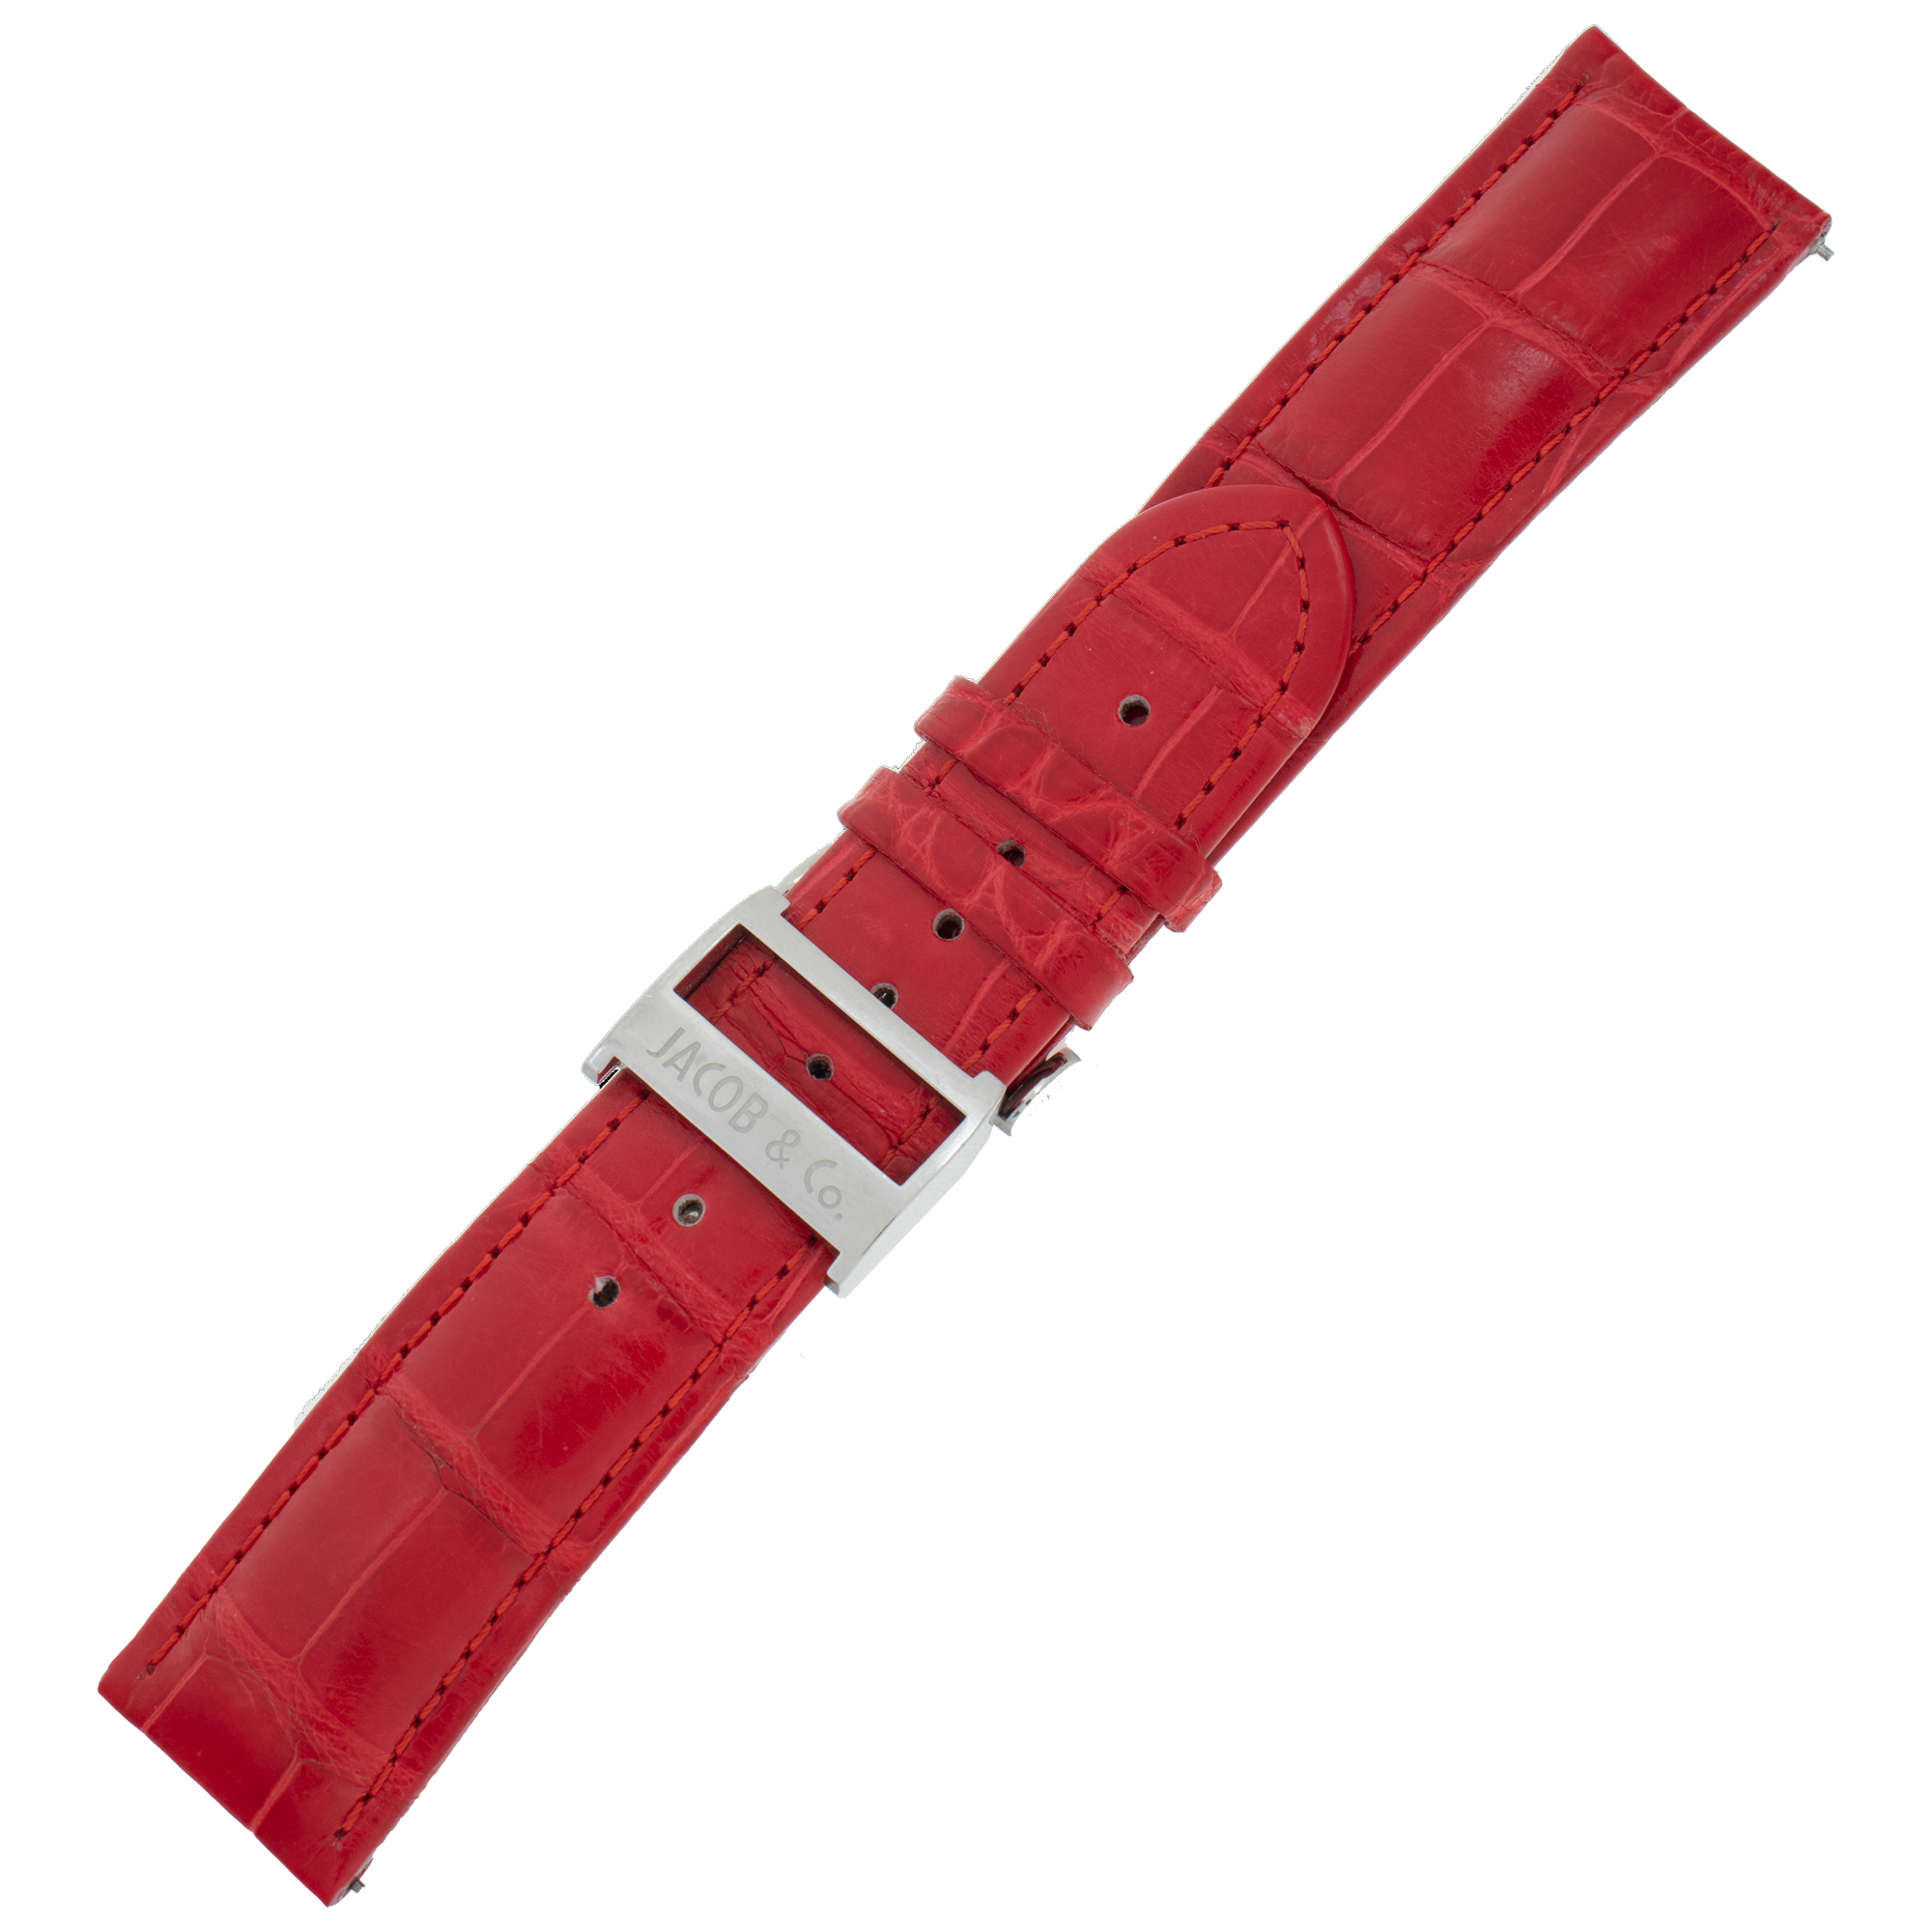 Jacob & Co. Red Alligator strap with silver tang buckle (22mm x 20mm)